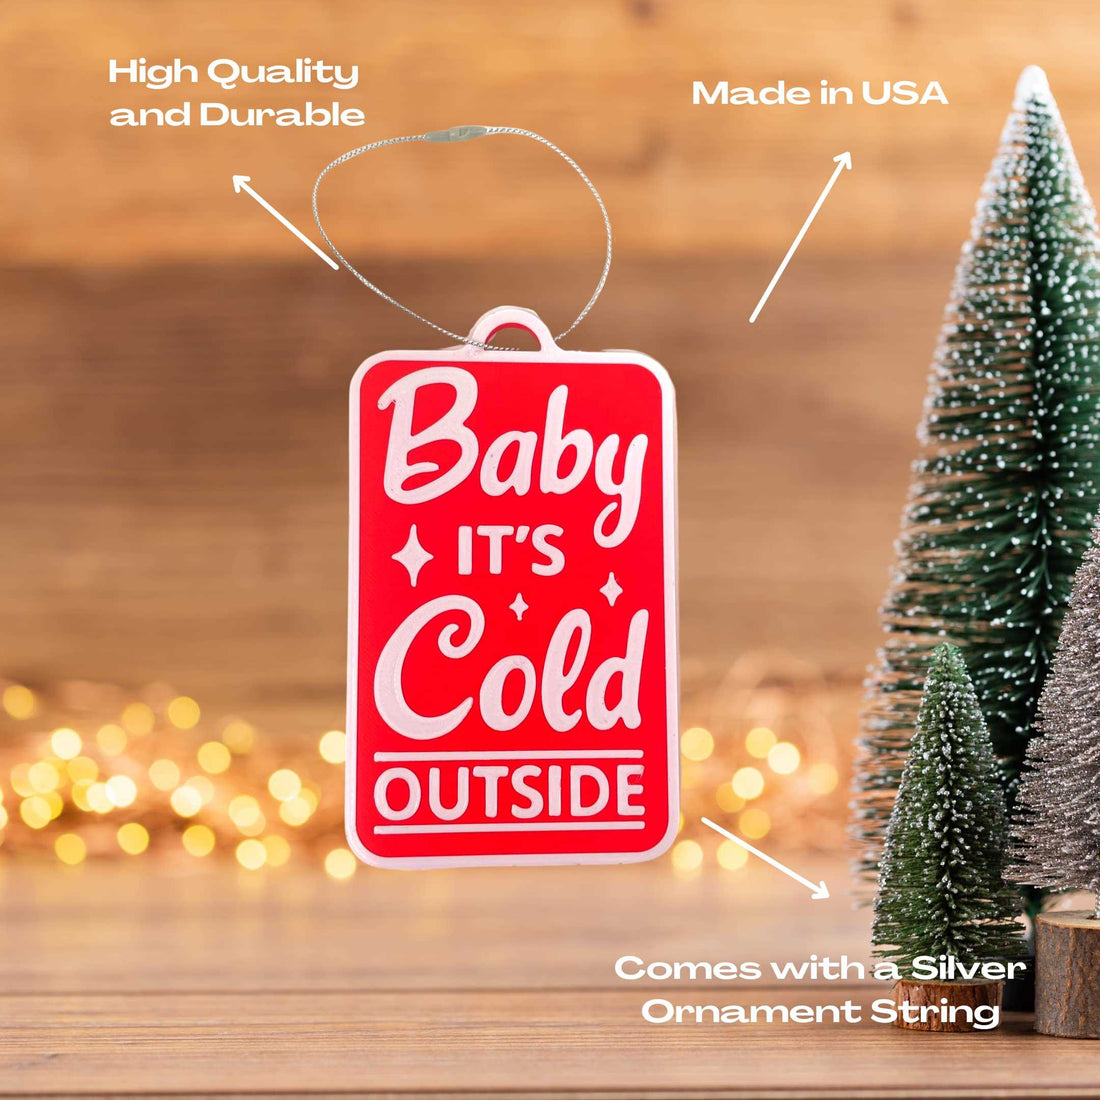 Baby It's Cold Outside Christmas Ornament - Decorative Holiday Ornament - Made in The USA